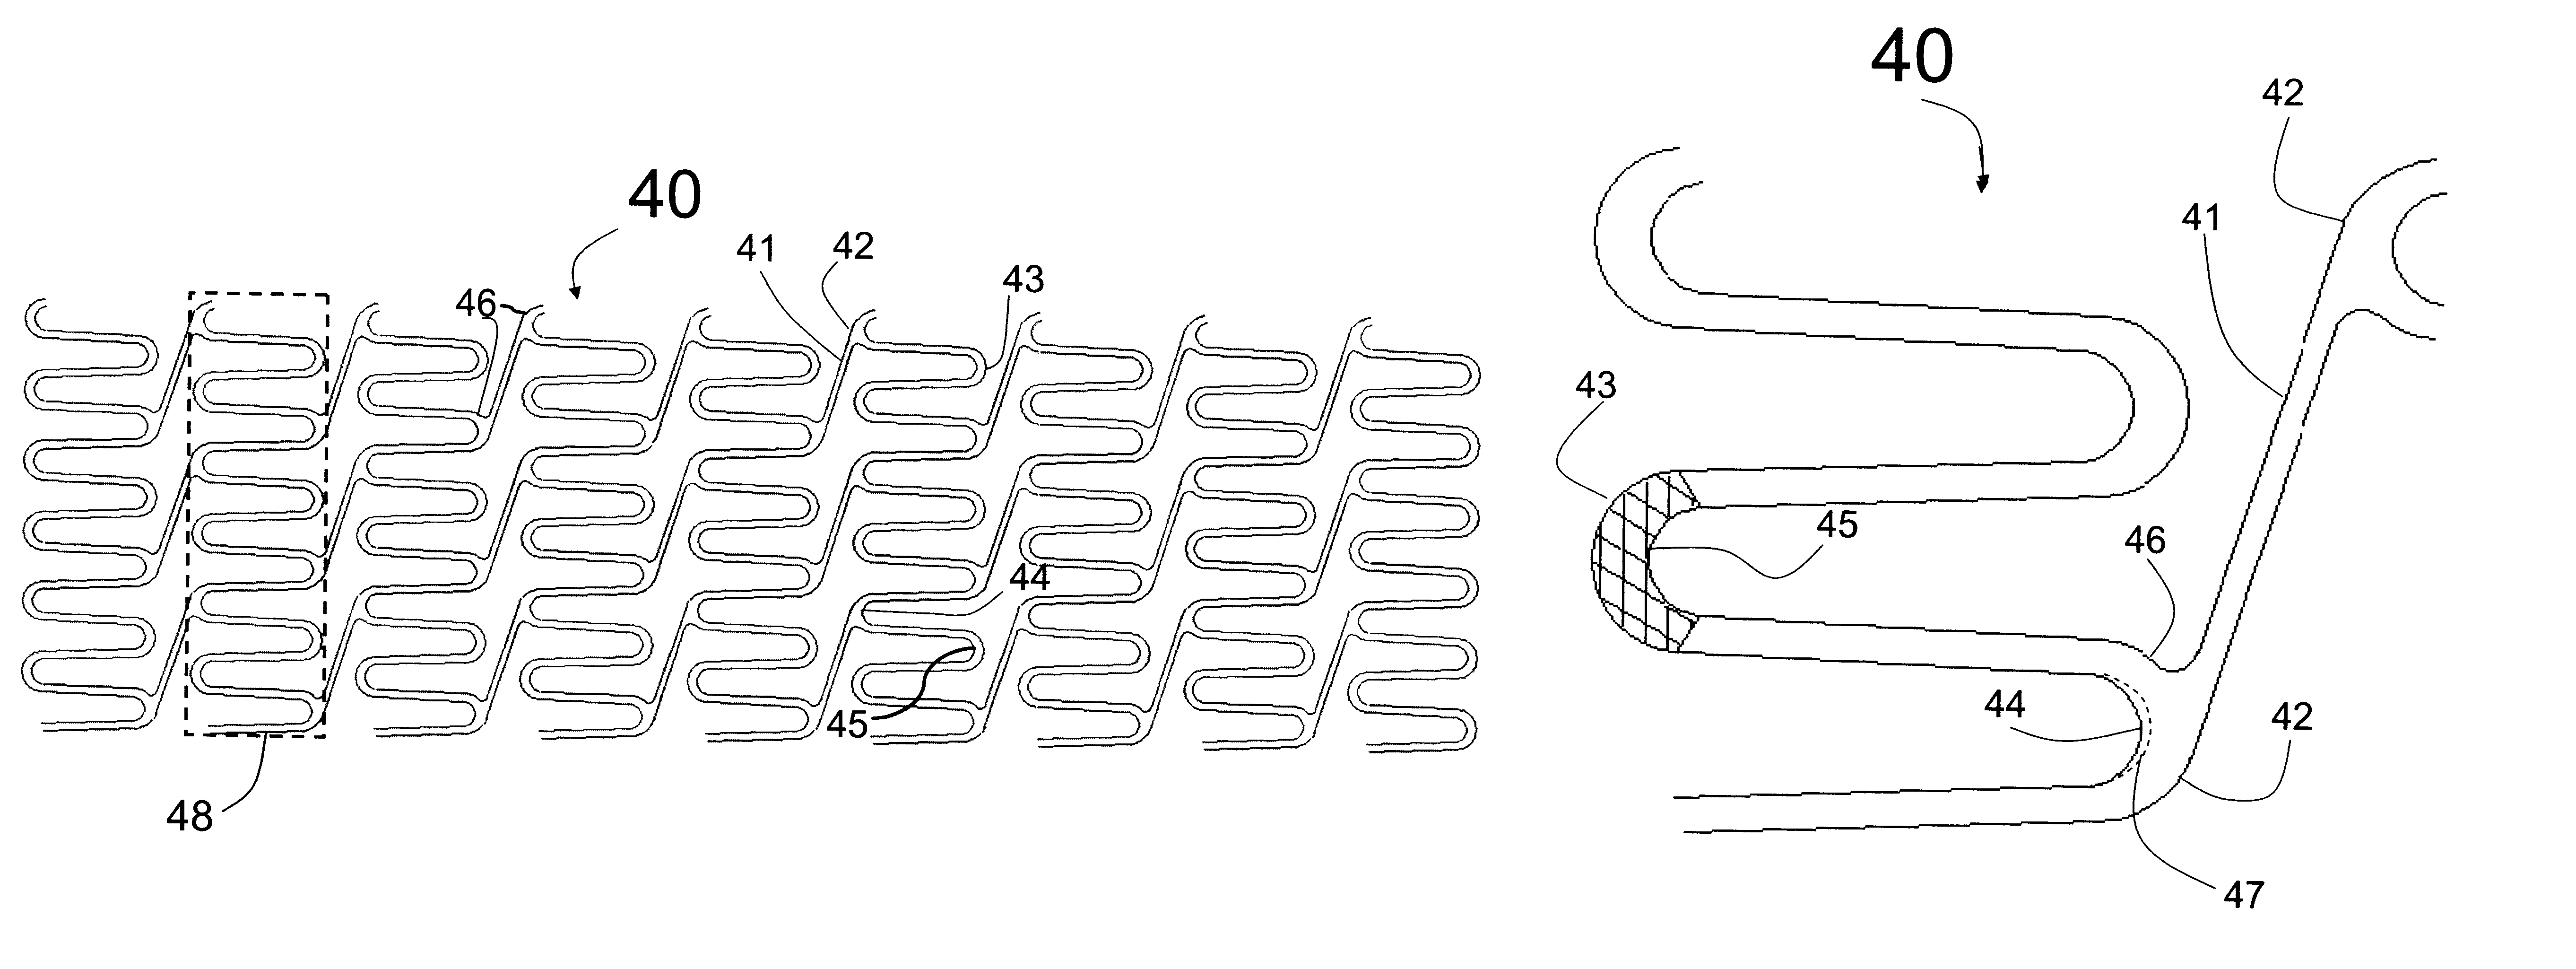 Hybrid stent with helical connectors